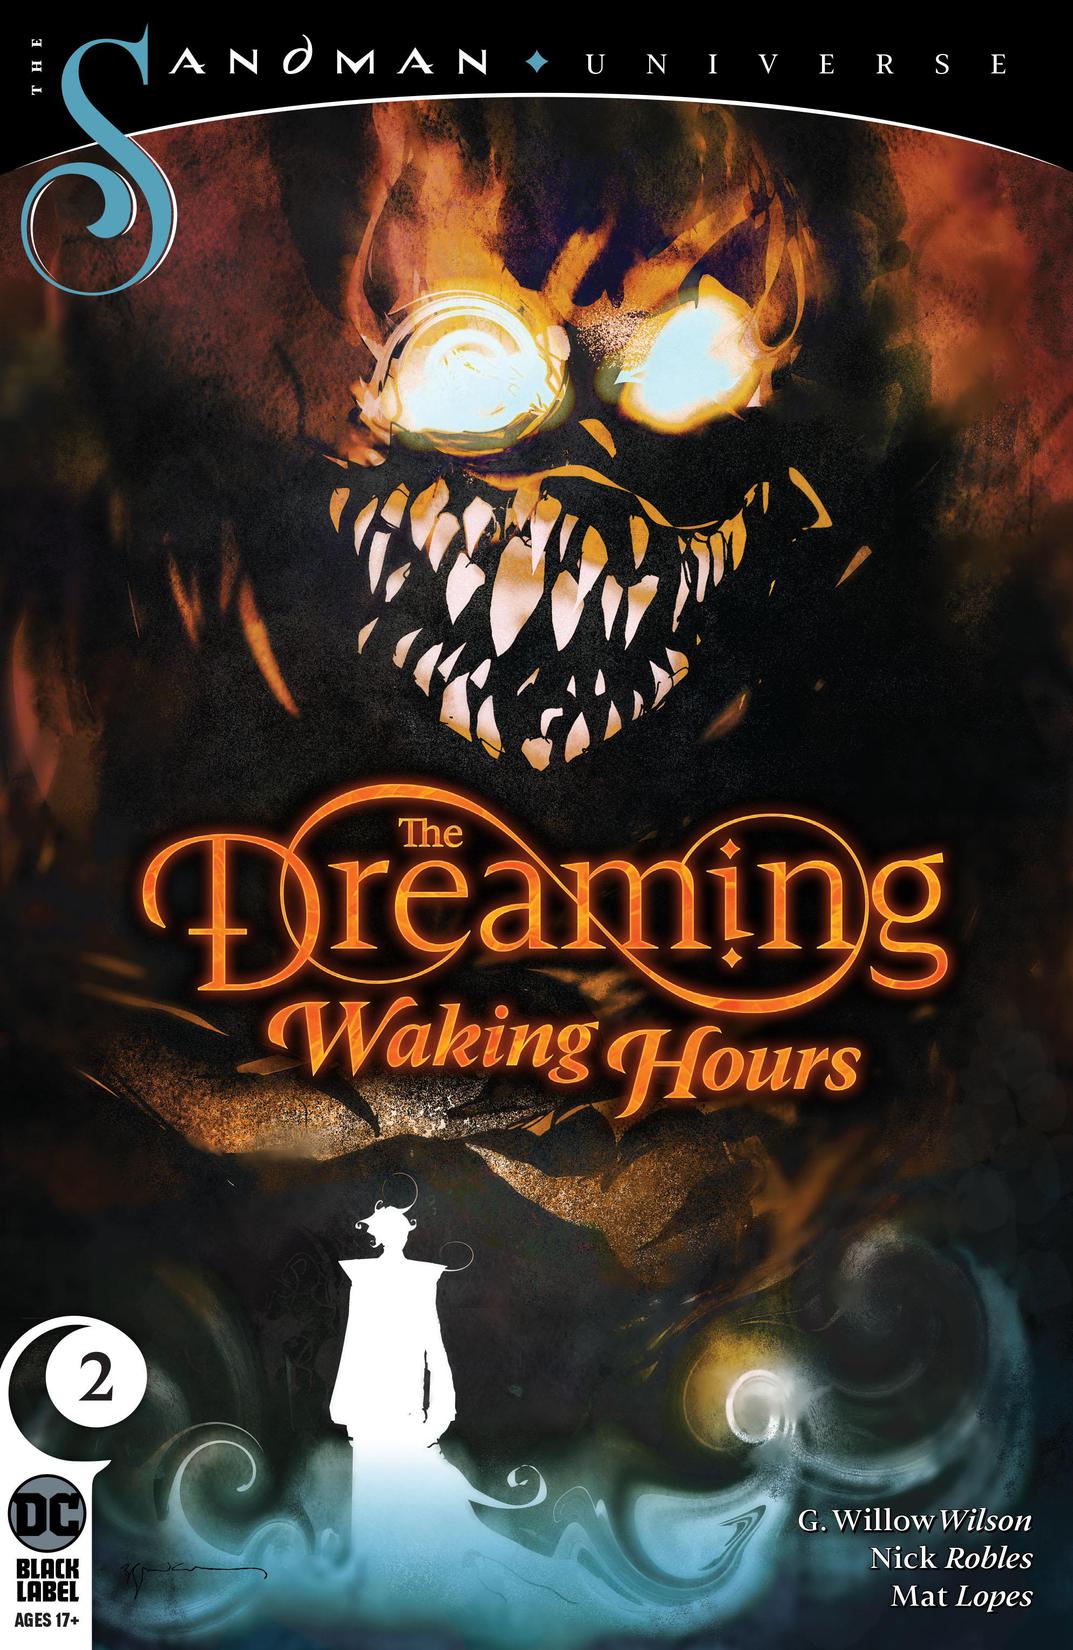 The Dreaming: Waking Hours #2 preview images